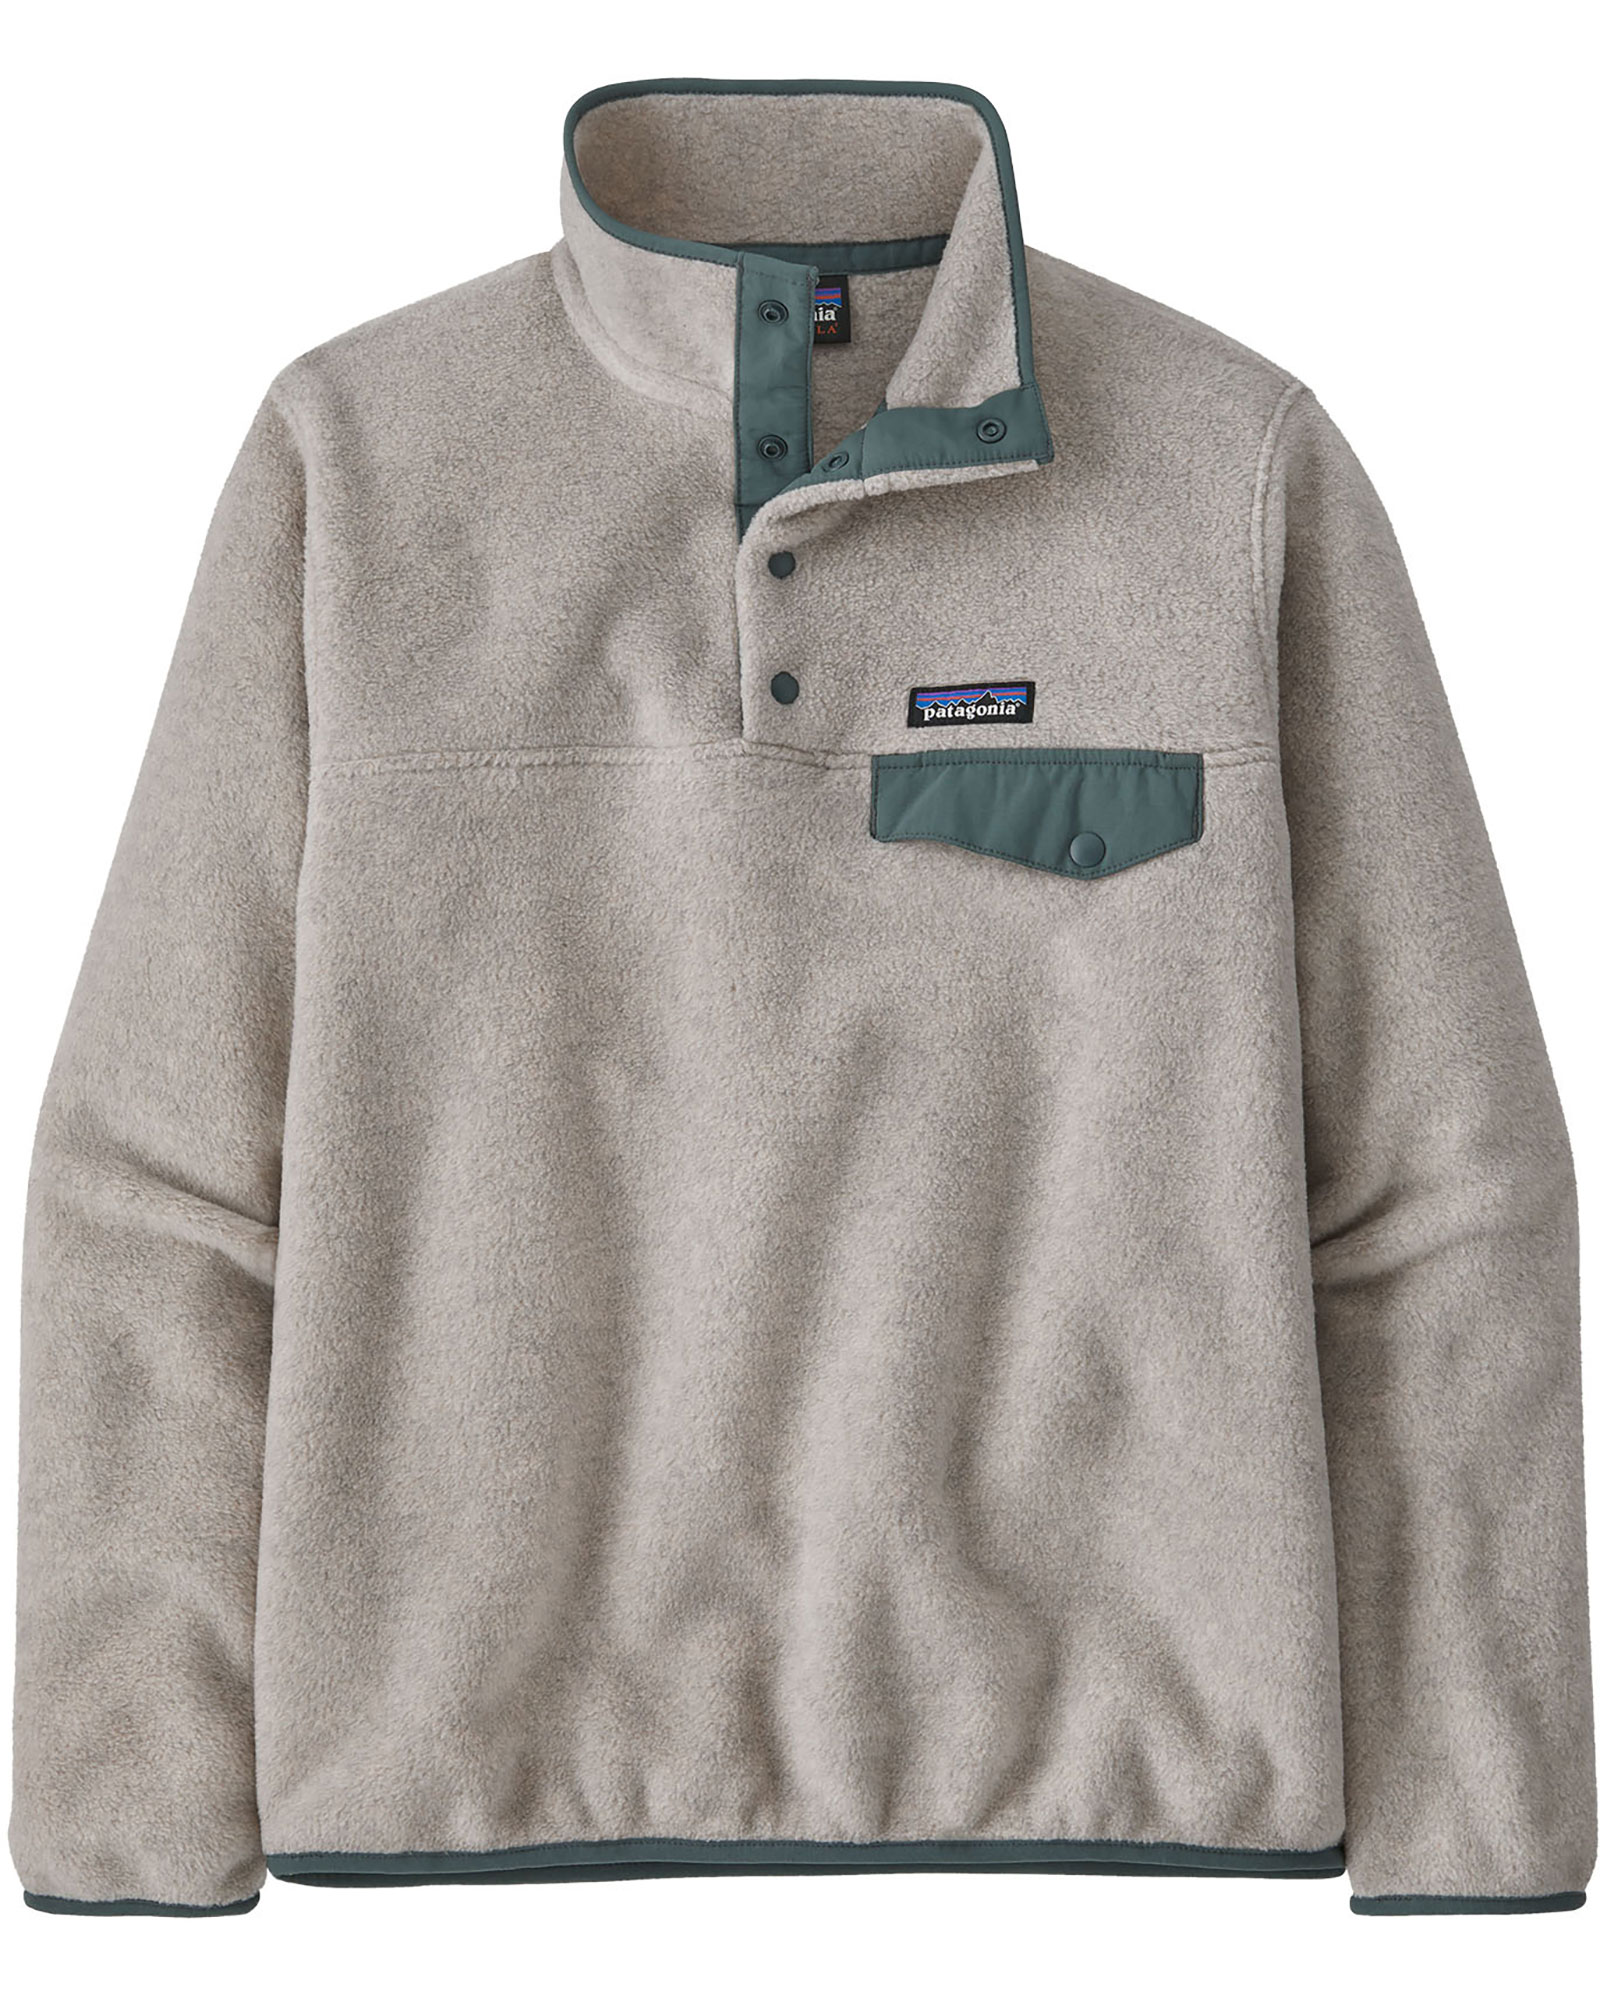 Patagonia Lwt Synchilla Women’s Snap T Pullover - Oatmeal Heather w/Nouveau Green XS